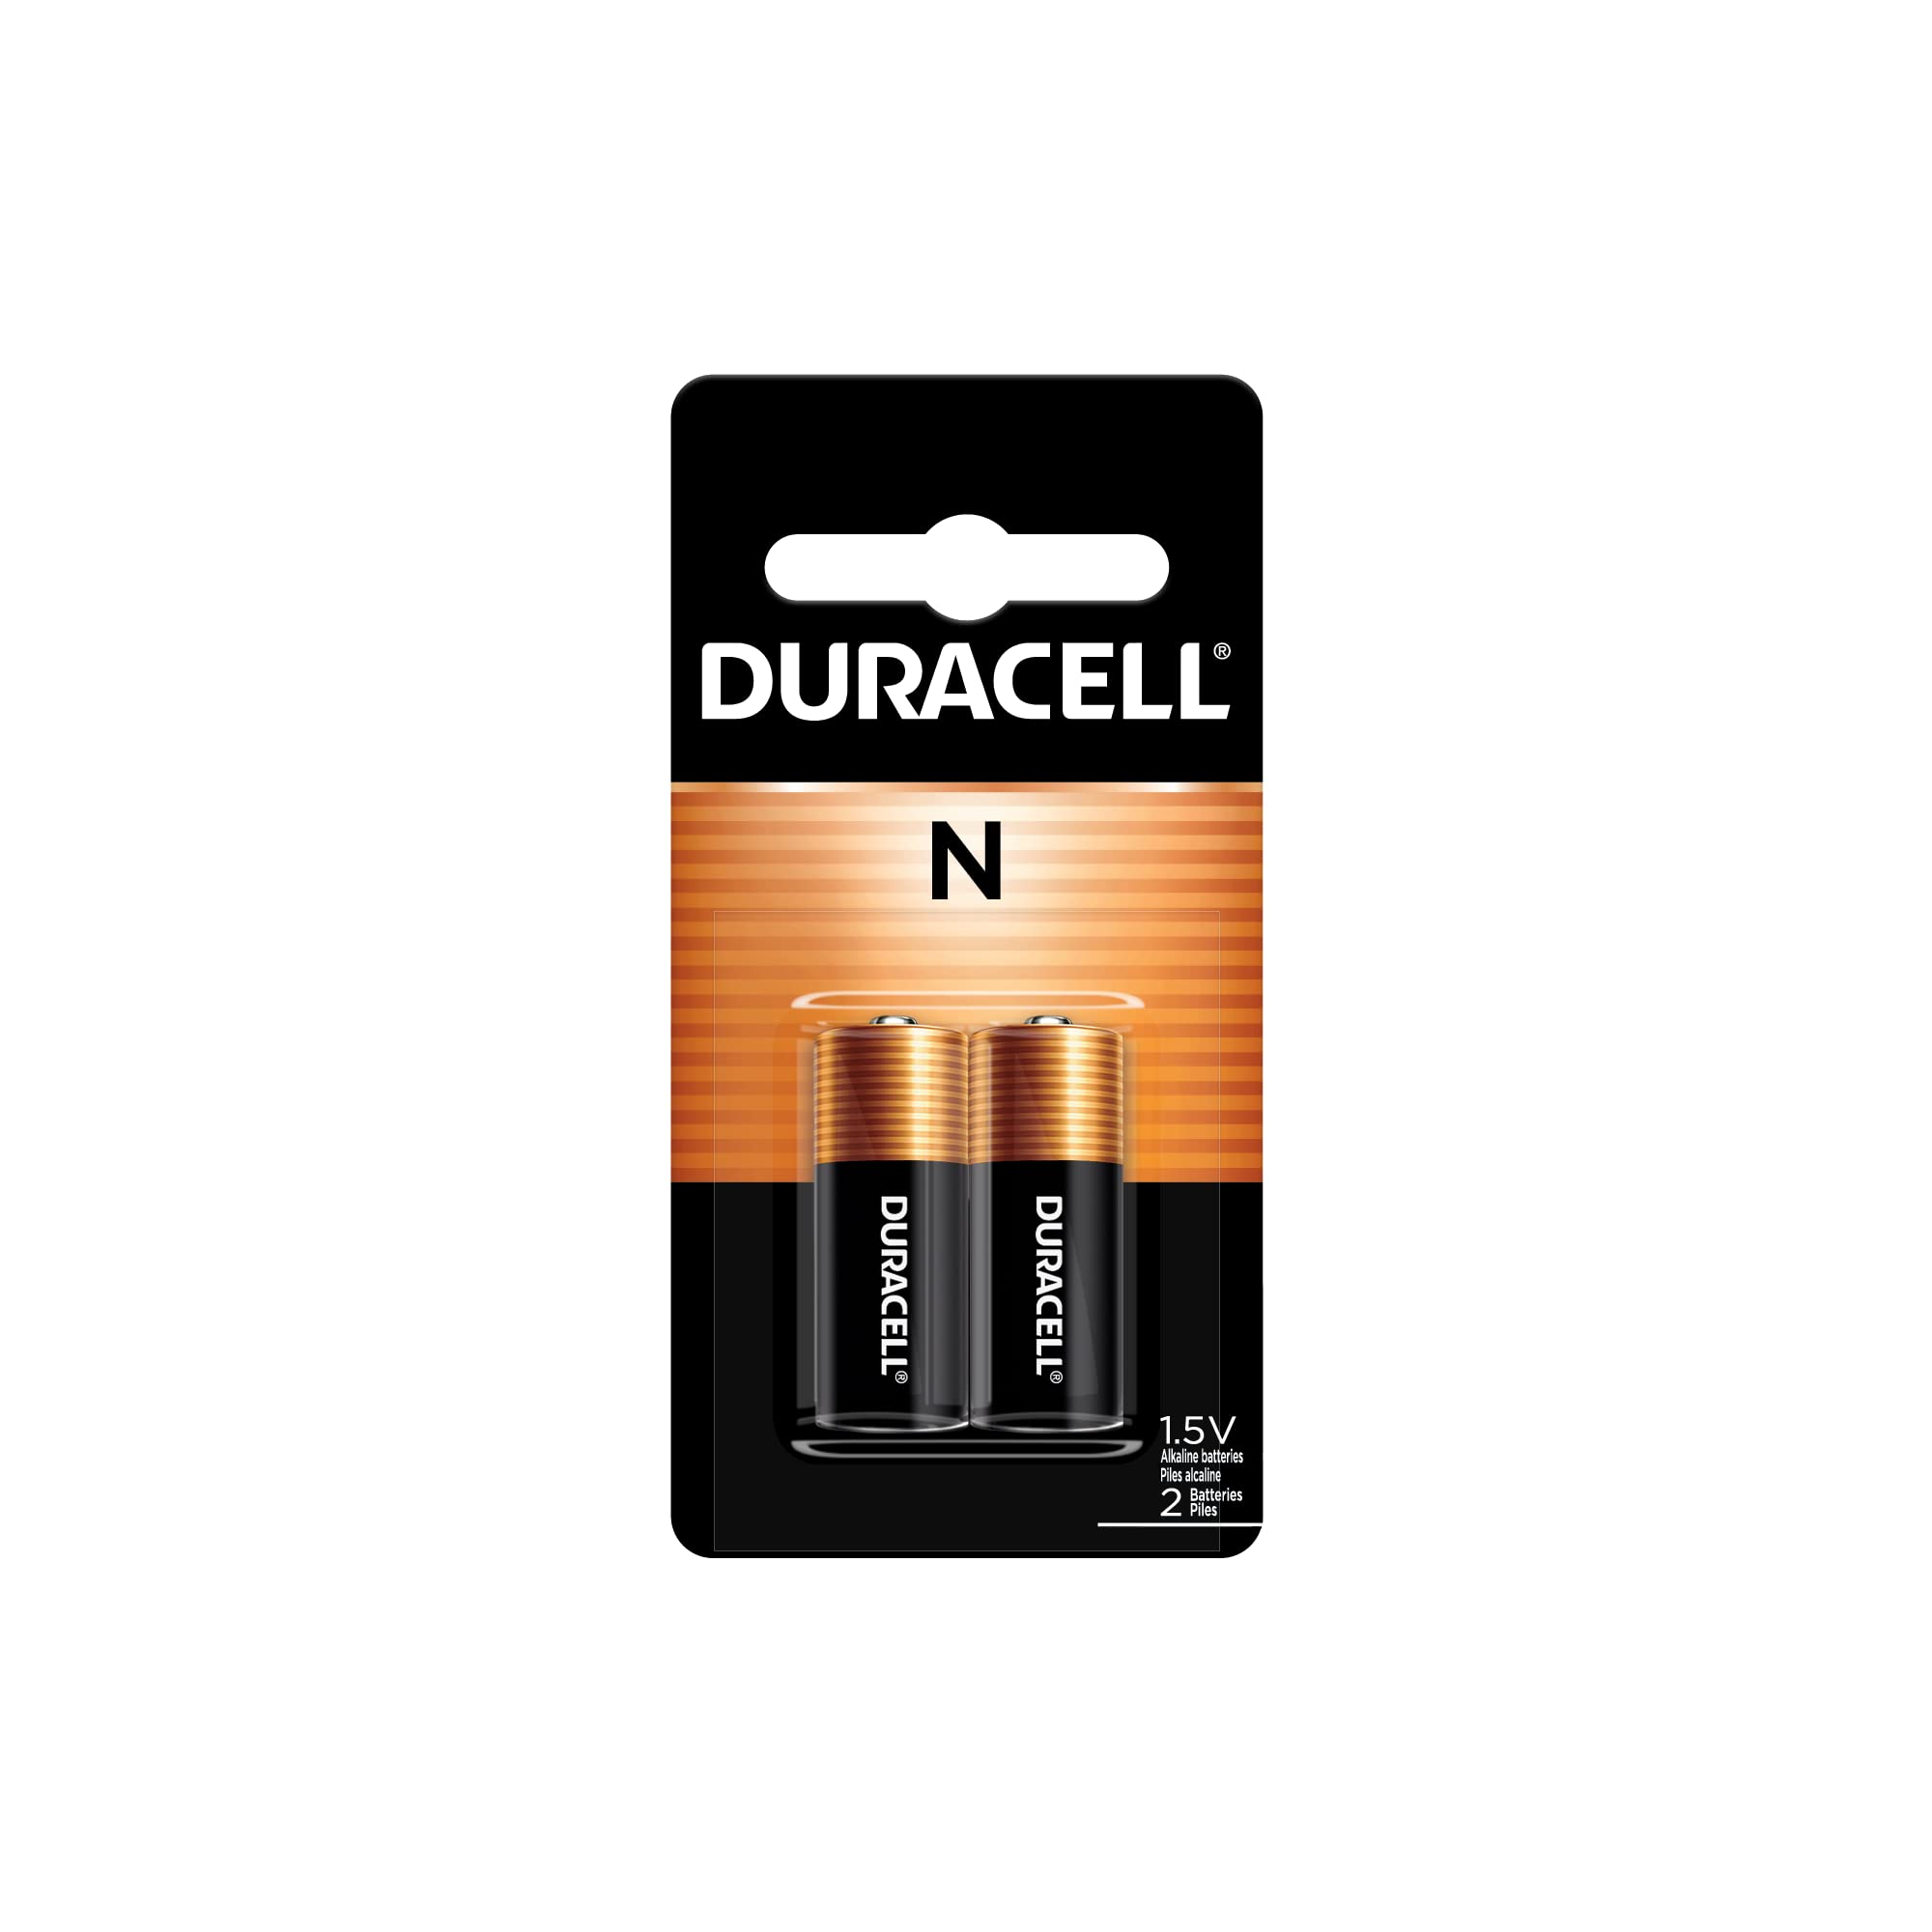 Duracell N 1.5V Alkaline Battery, 2 Count Pack, N 1.5 Volt Alkaline Battery, Long-Lasting for Medical Devices, Key Fobs, GPS Trackers, and More